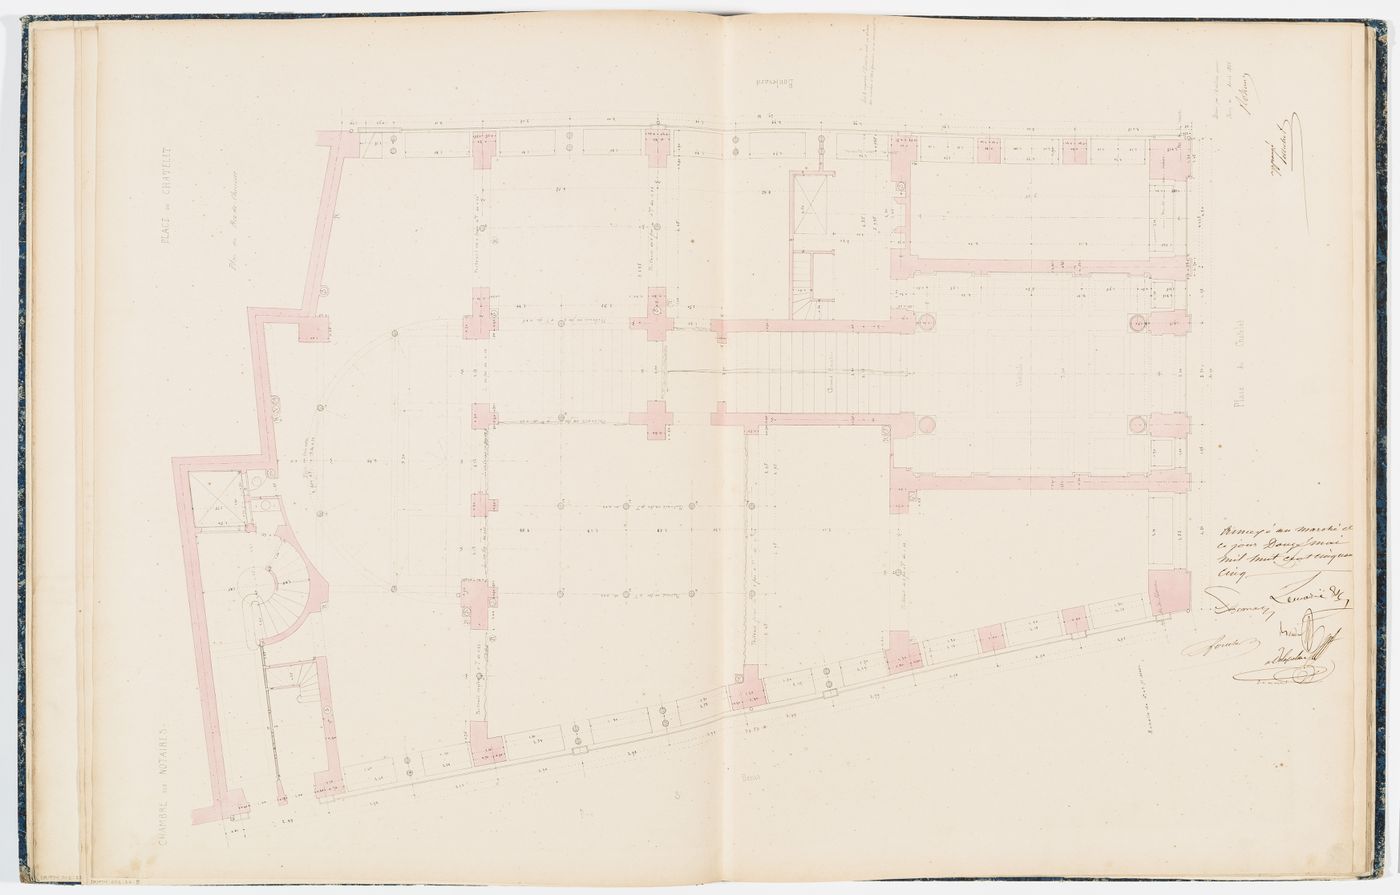 Contract drawing for the Chambre des Notaires: Ground floor plan